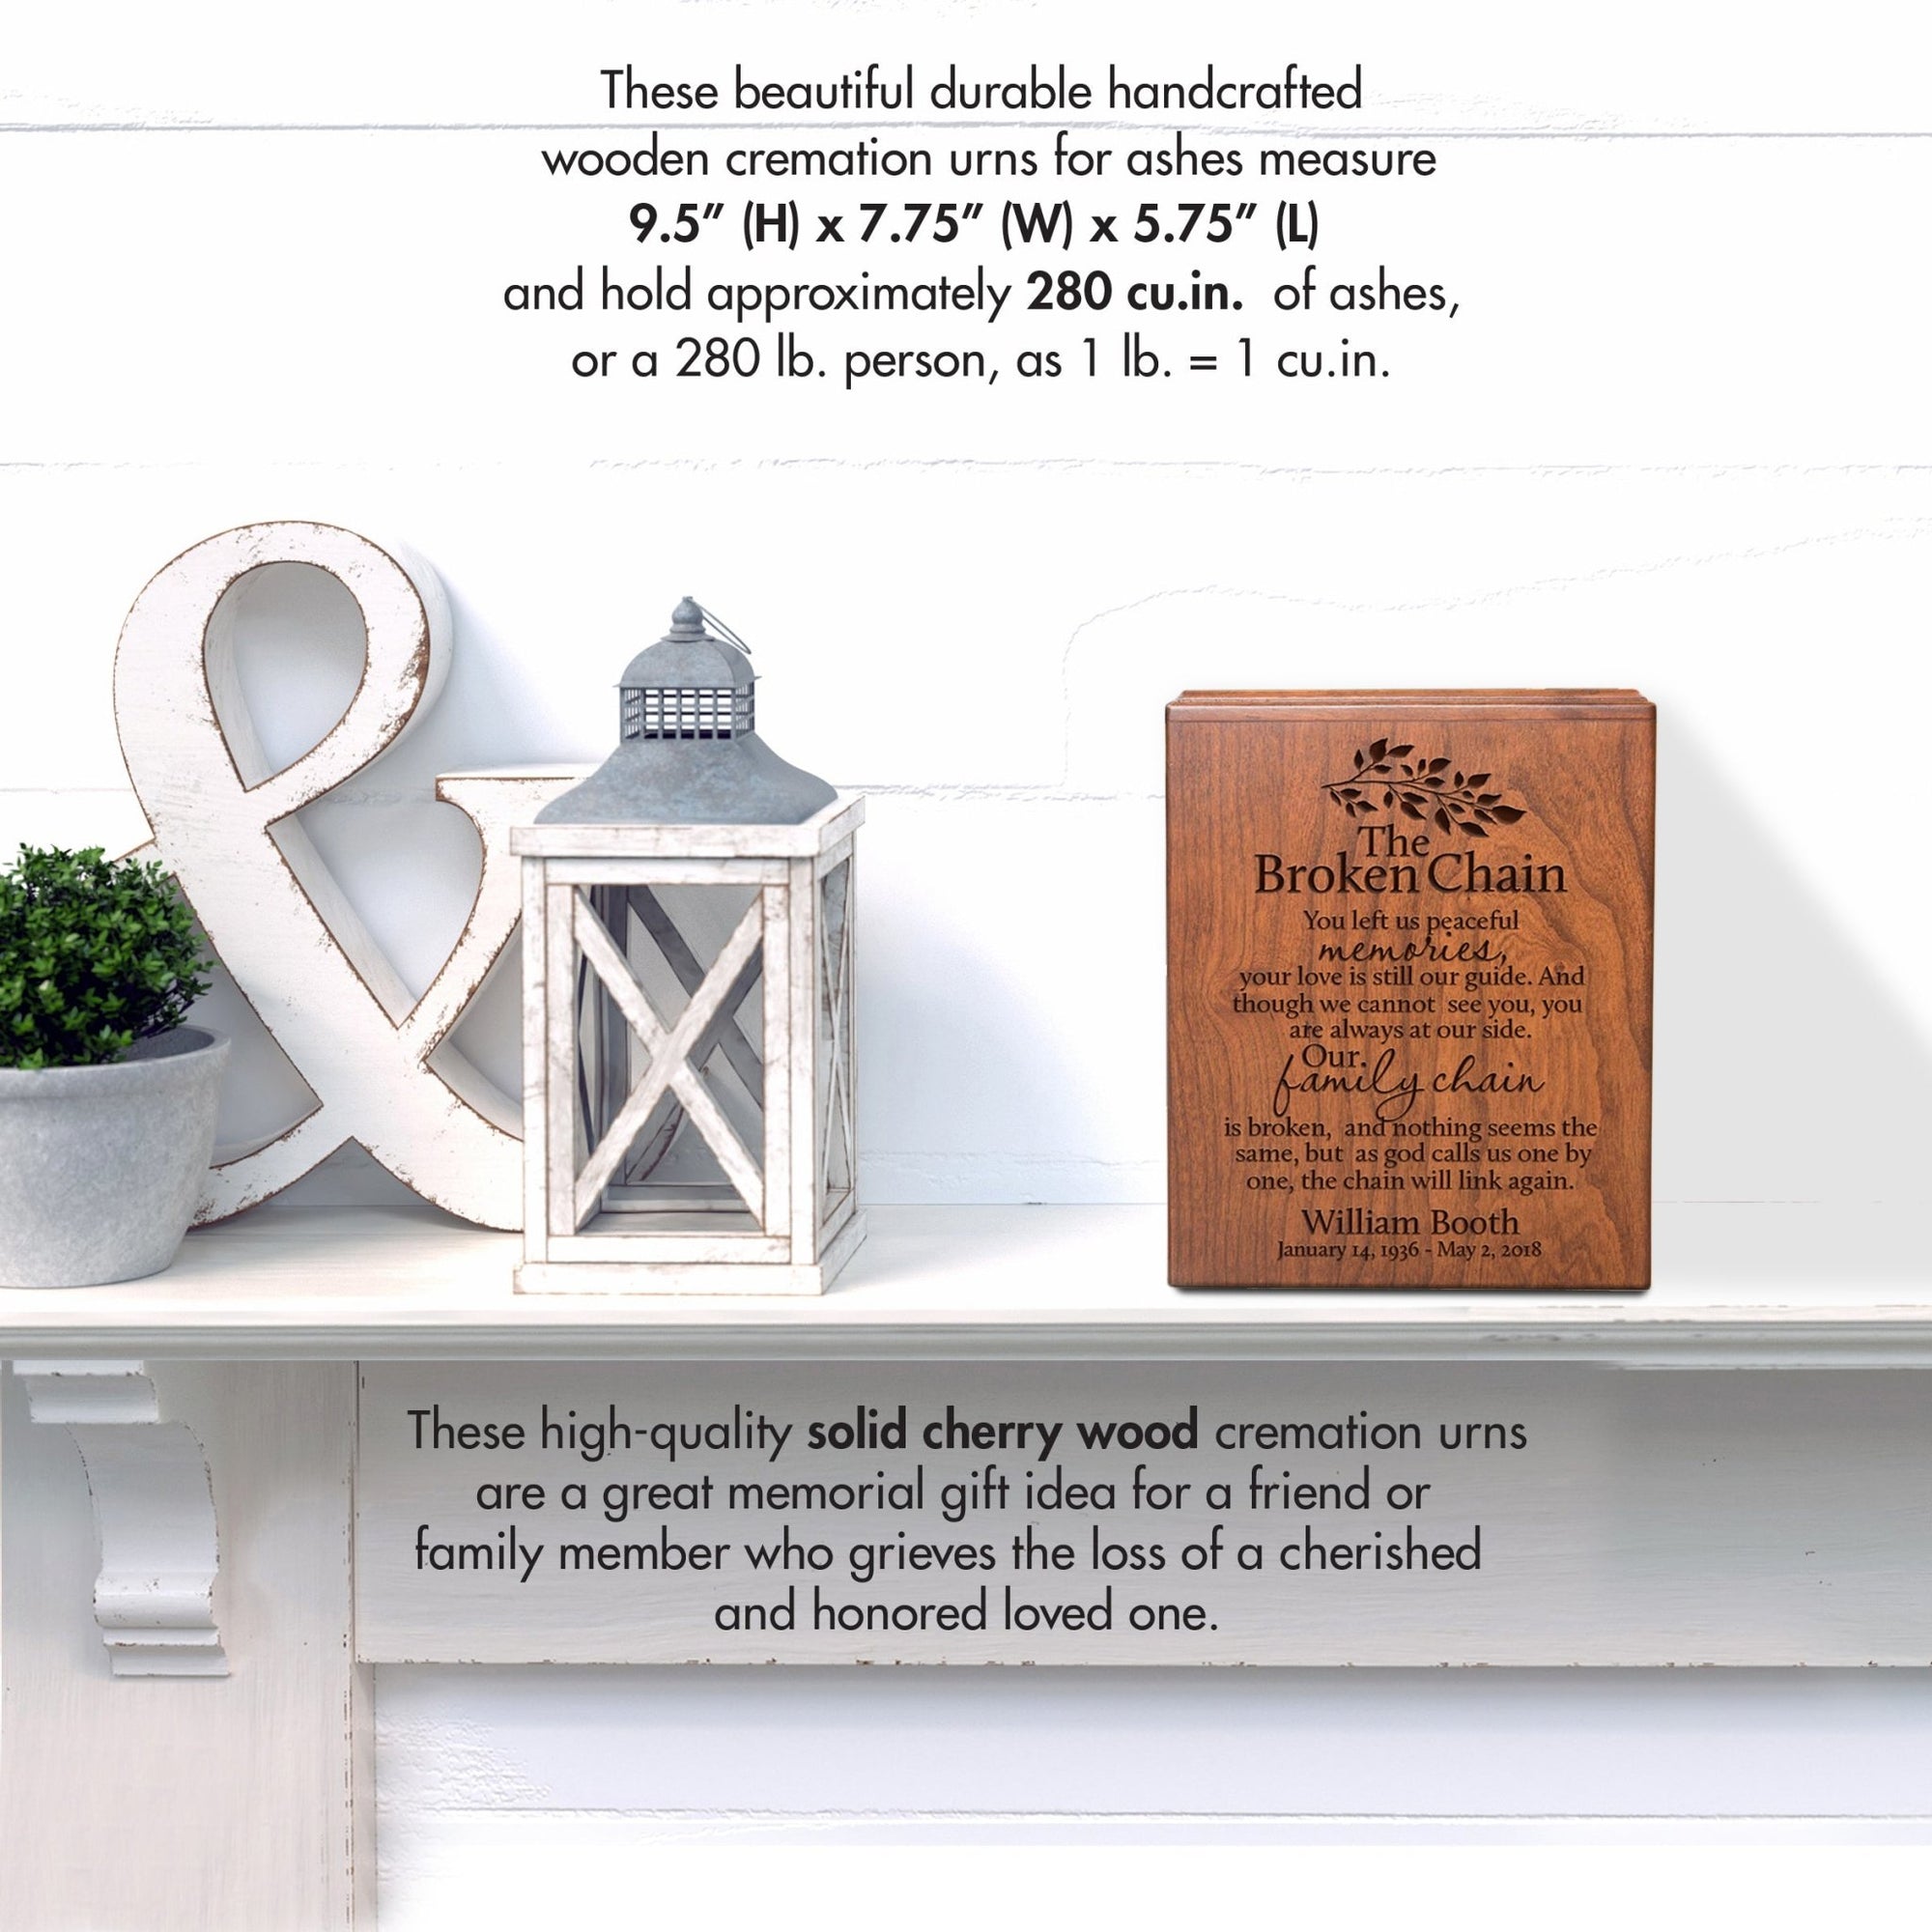 Custom Engraved Memorial Economy Keepsake Urn Box Holds 280 Cu Inches Of Human Ashes In Loving Memory - LifeSong Milestones